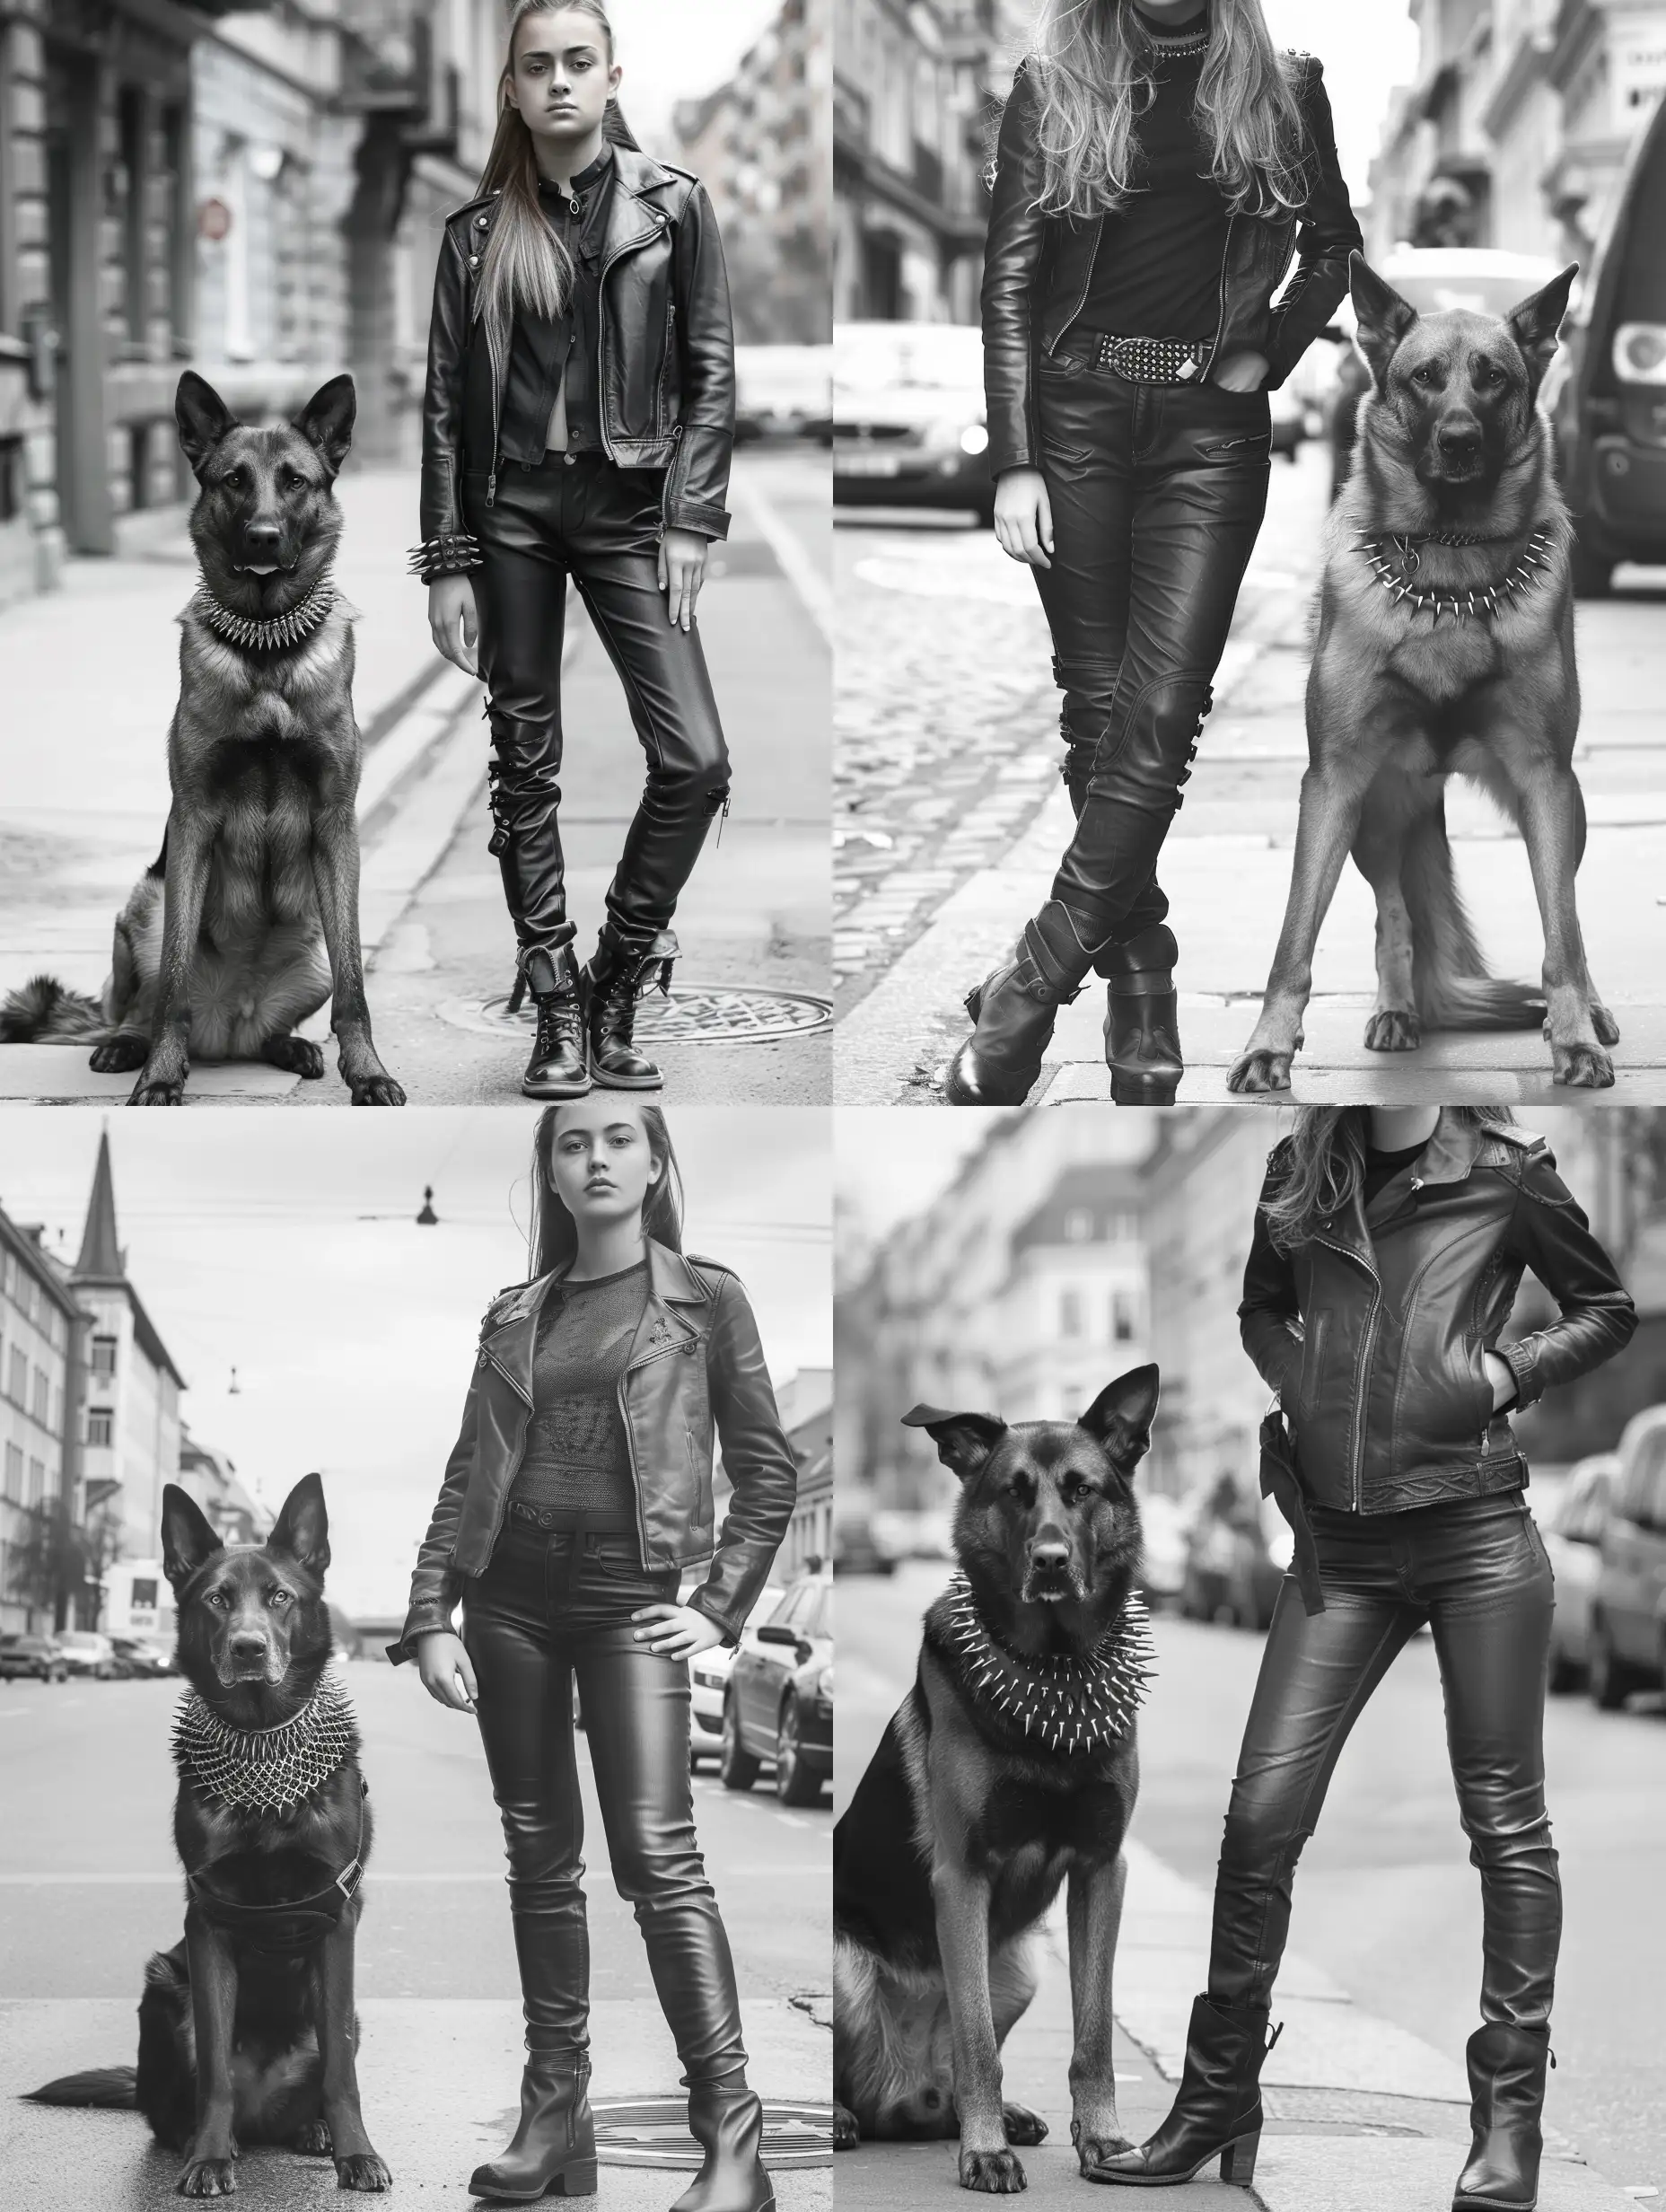 The girl stands on the street in leather pants and jacket next to a German Shepherd with a collar with spikes the girl's face is clearly visible and looks into the camera realistic photo 